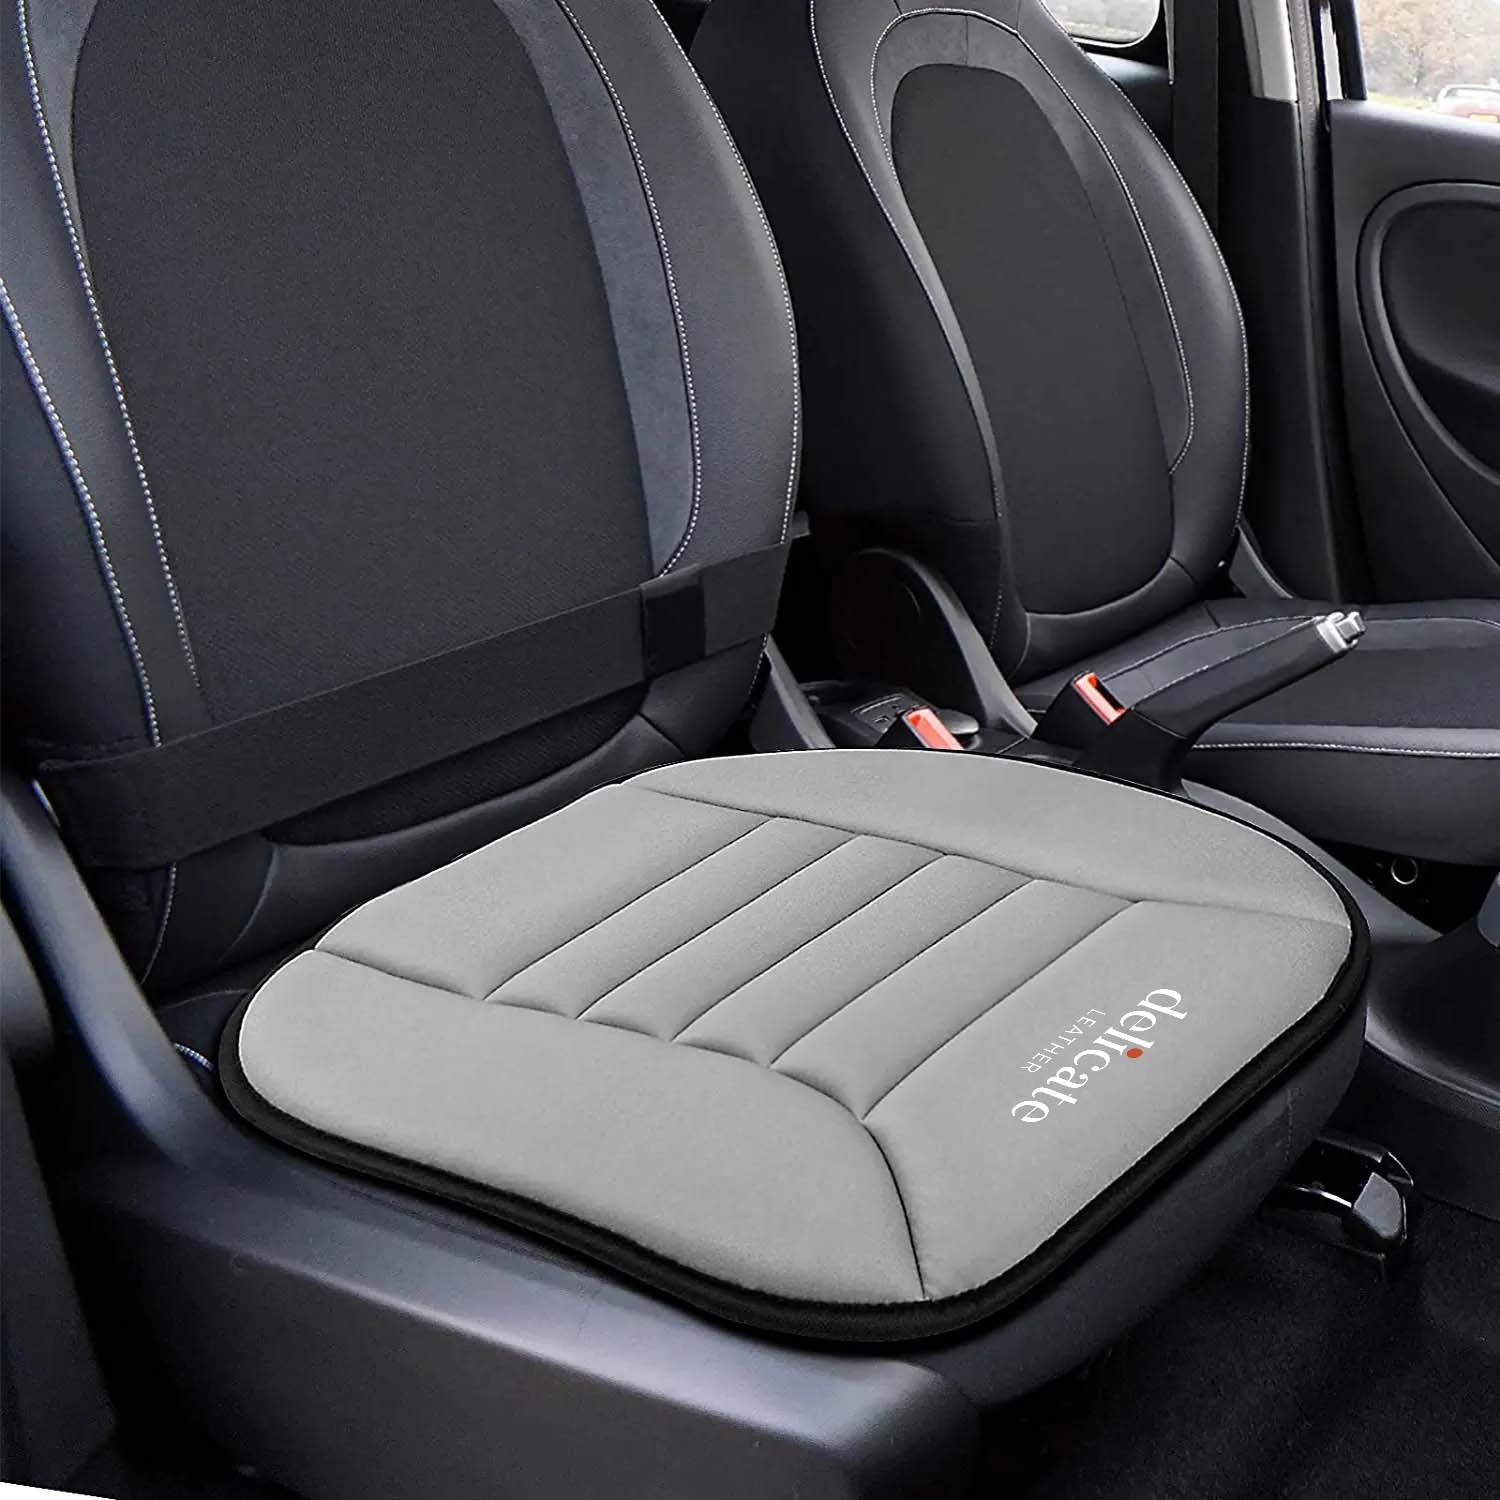 KIA Car Seat Cushion: Enhance Comfort and Support for Your Drive